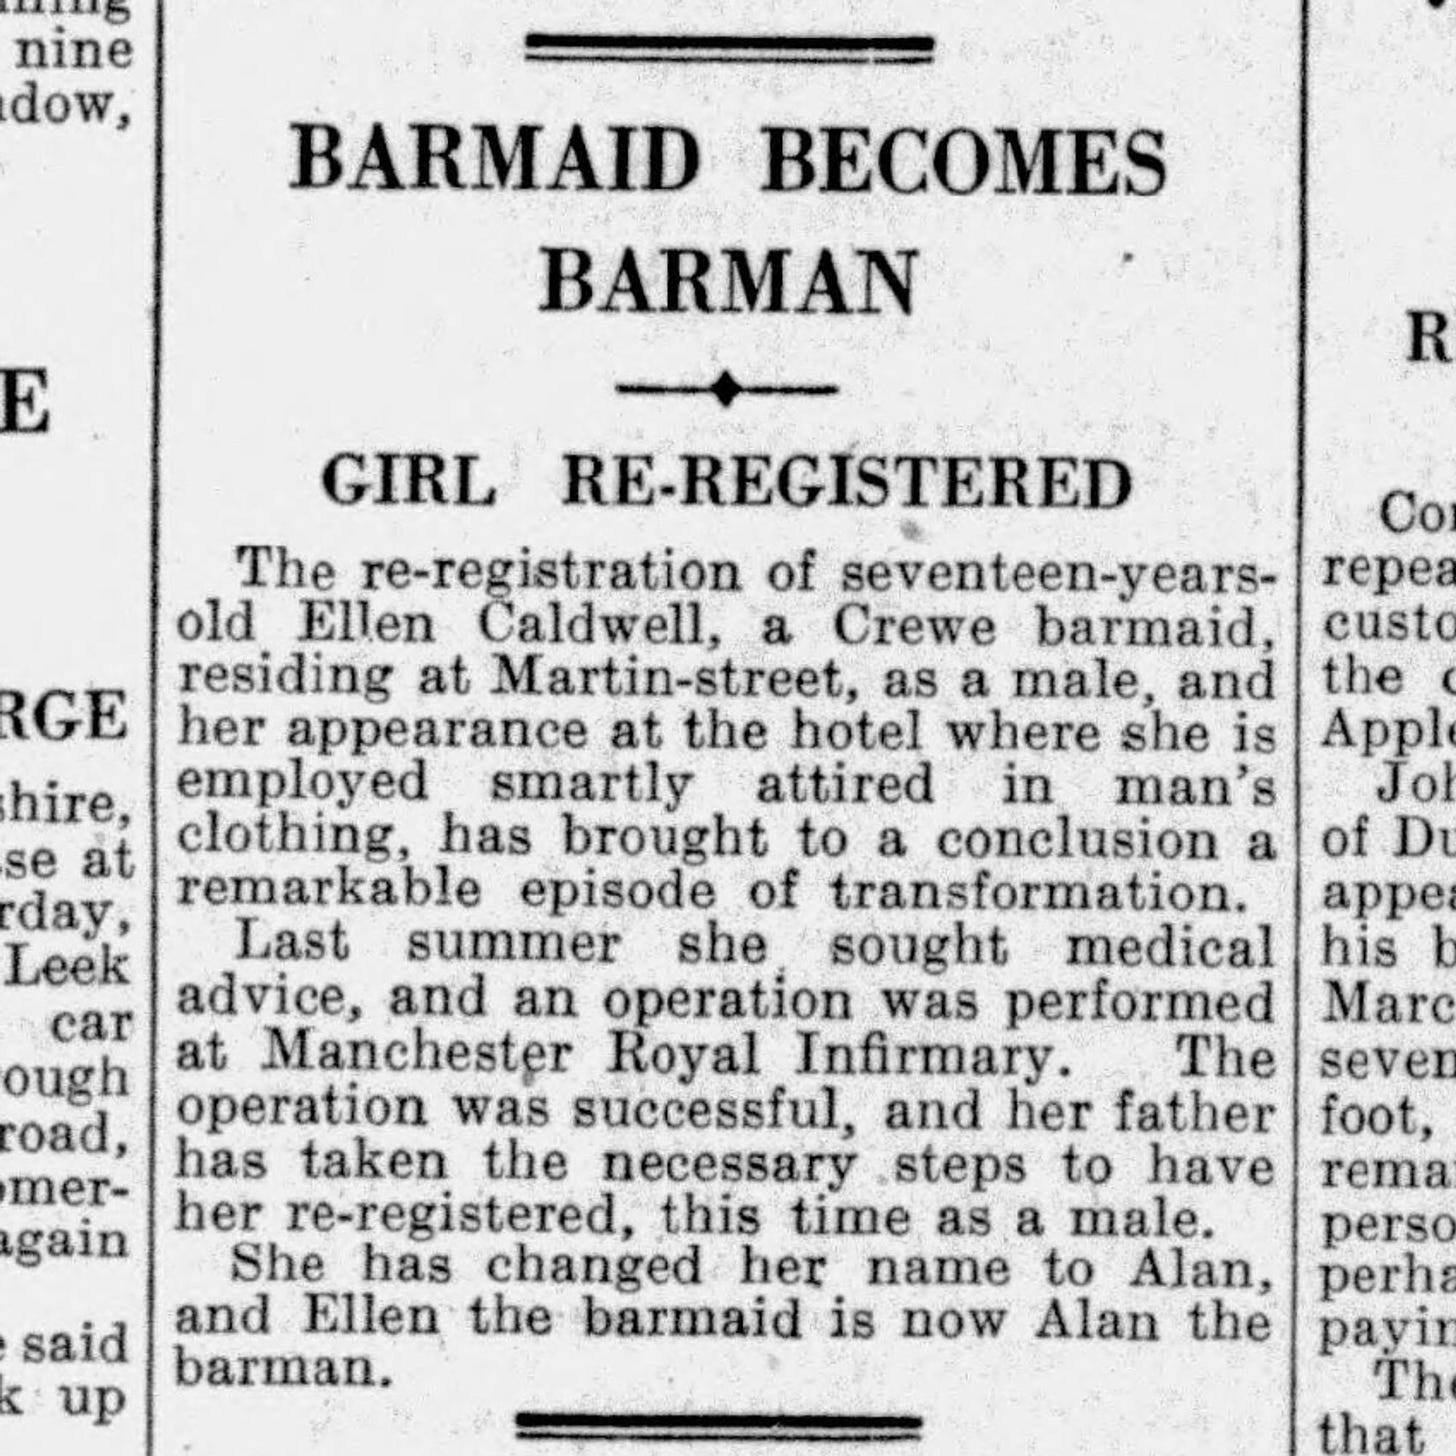 A short newspaper story. It reads: "Barmaid becomes barman: Girl Re-Registered." It concludes, saying, "She has changed her name to Alan, and Ellen the barmaid is now Alan the barman."